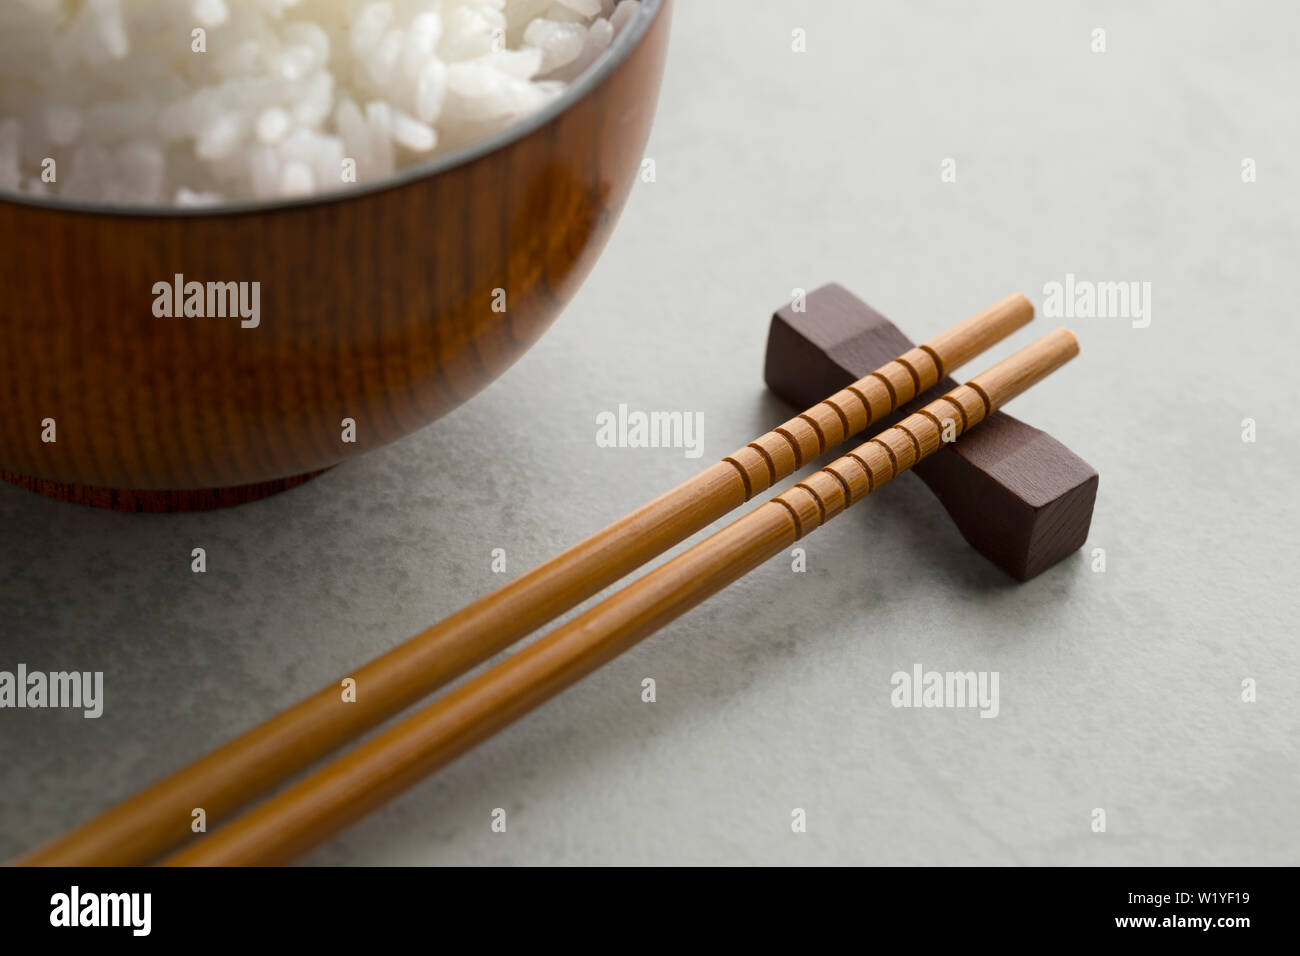 Traditional Japanese wooden chopsticks and a bowl with white rice in the background Stock Photo